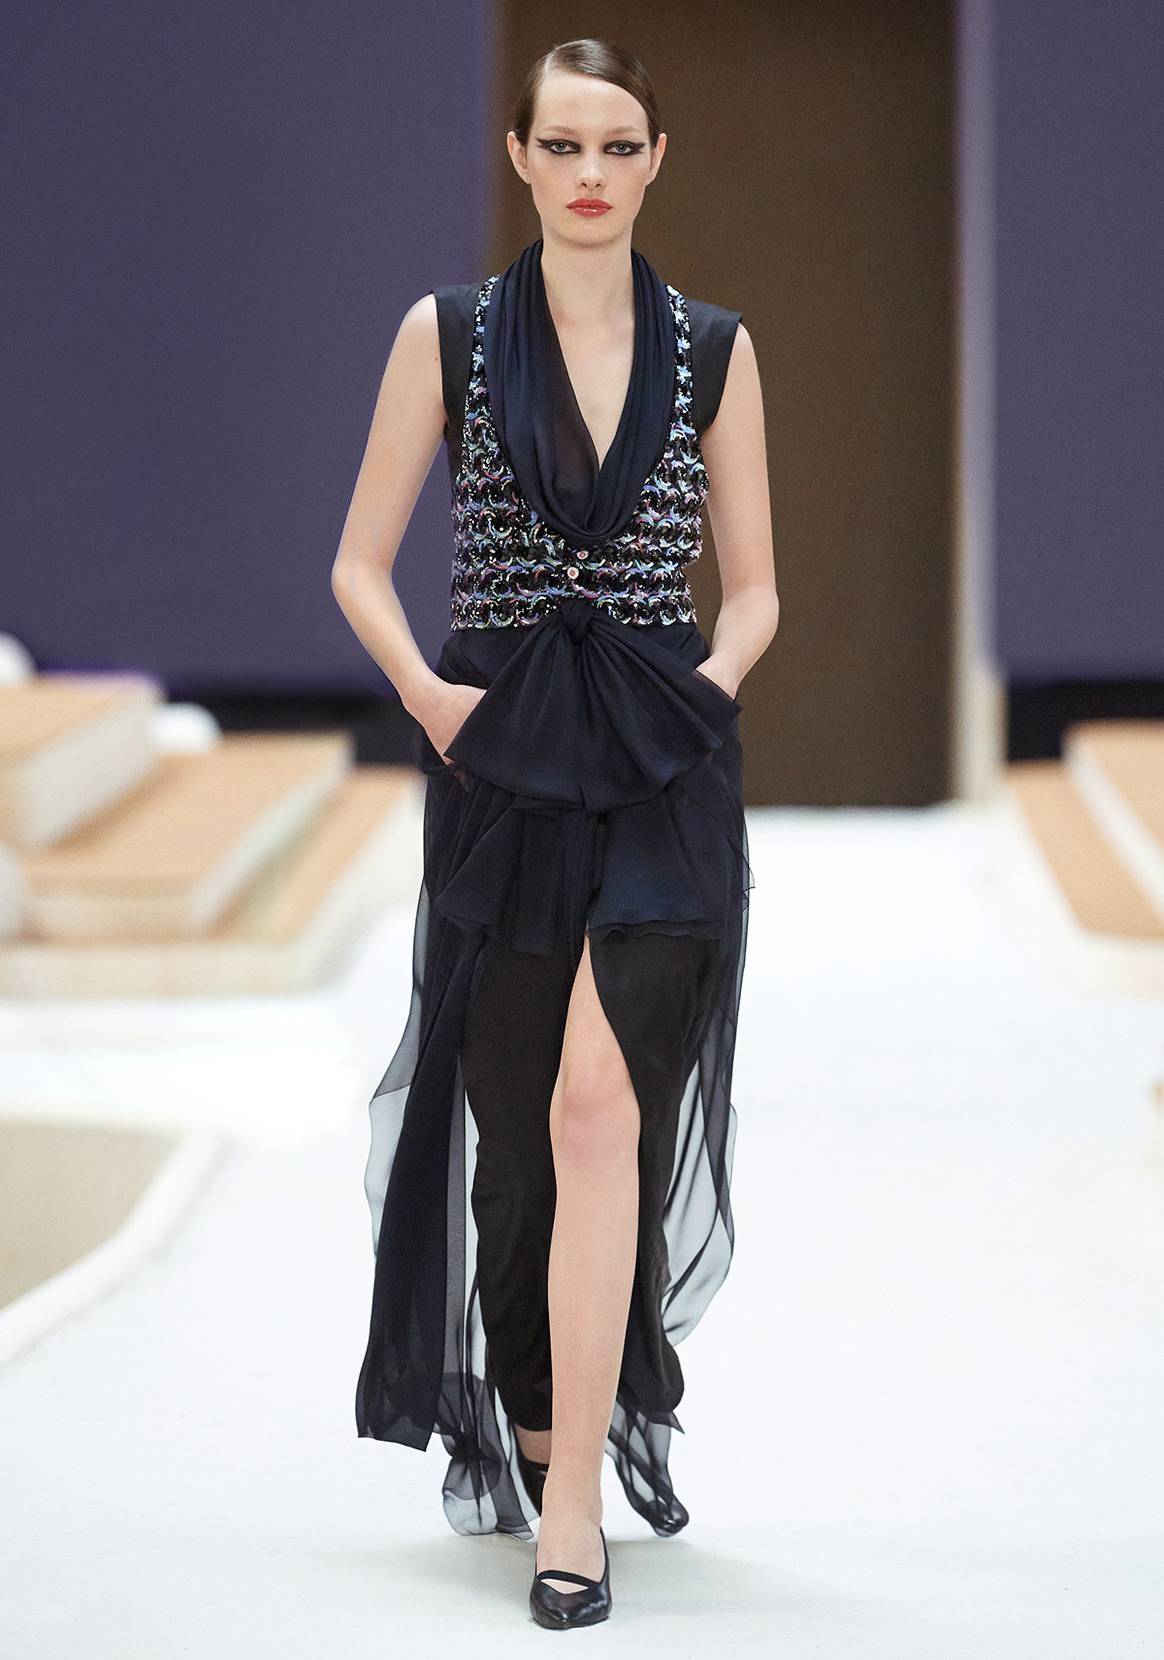 Paris Haute Couture week celebrated a modern vision of craftsmanship